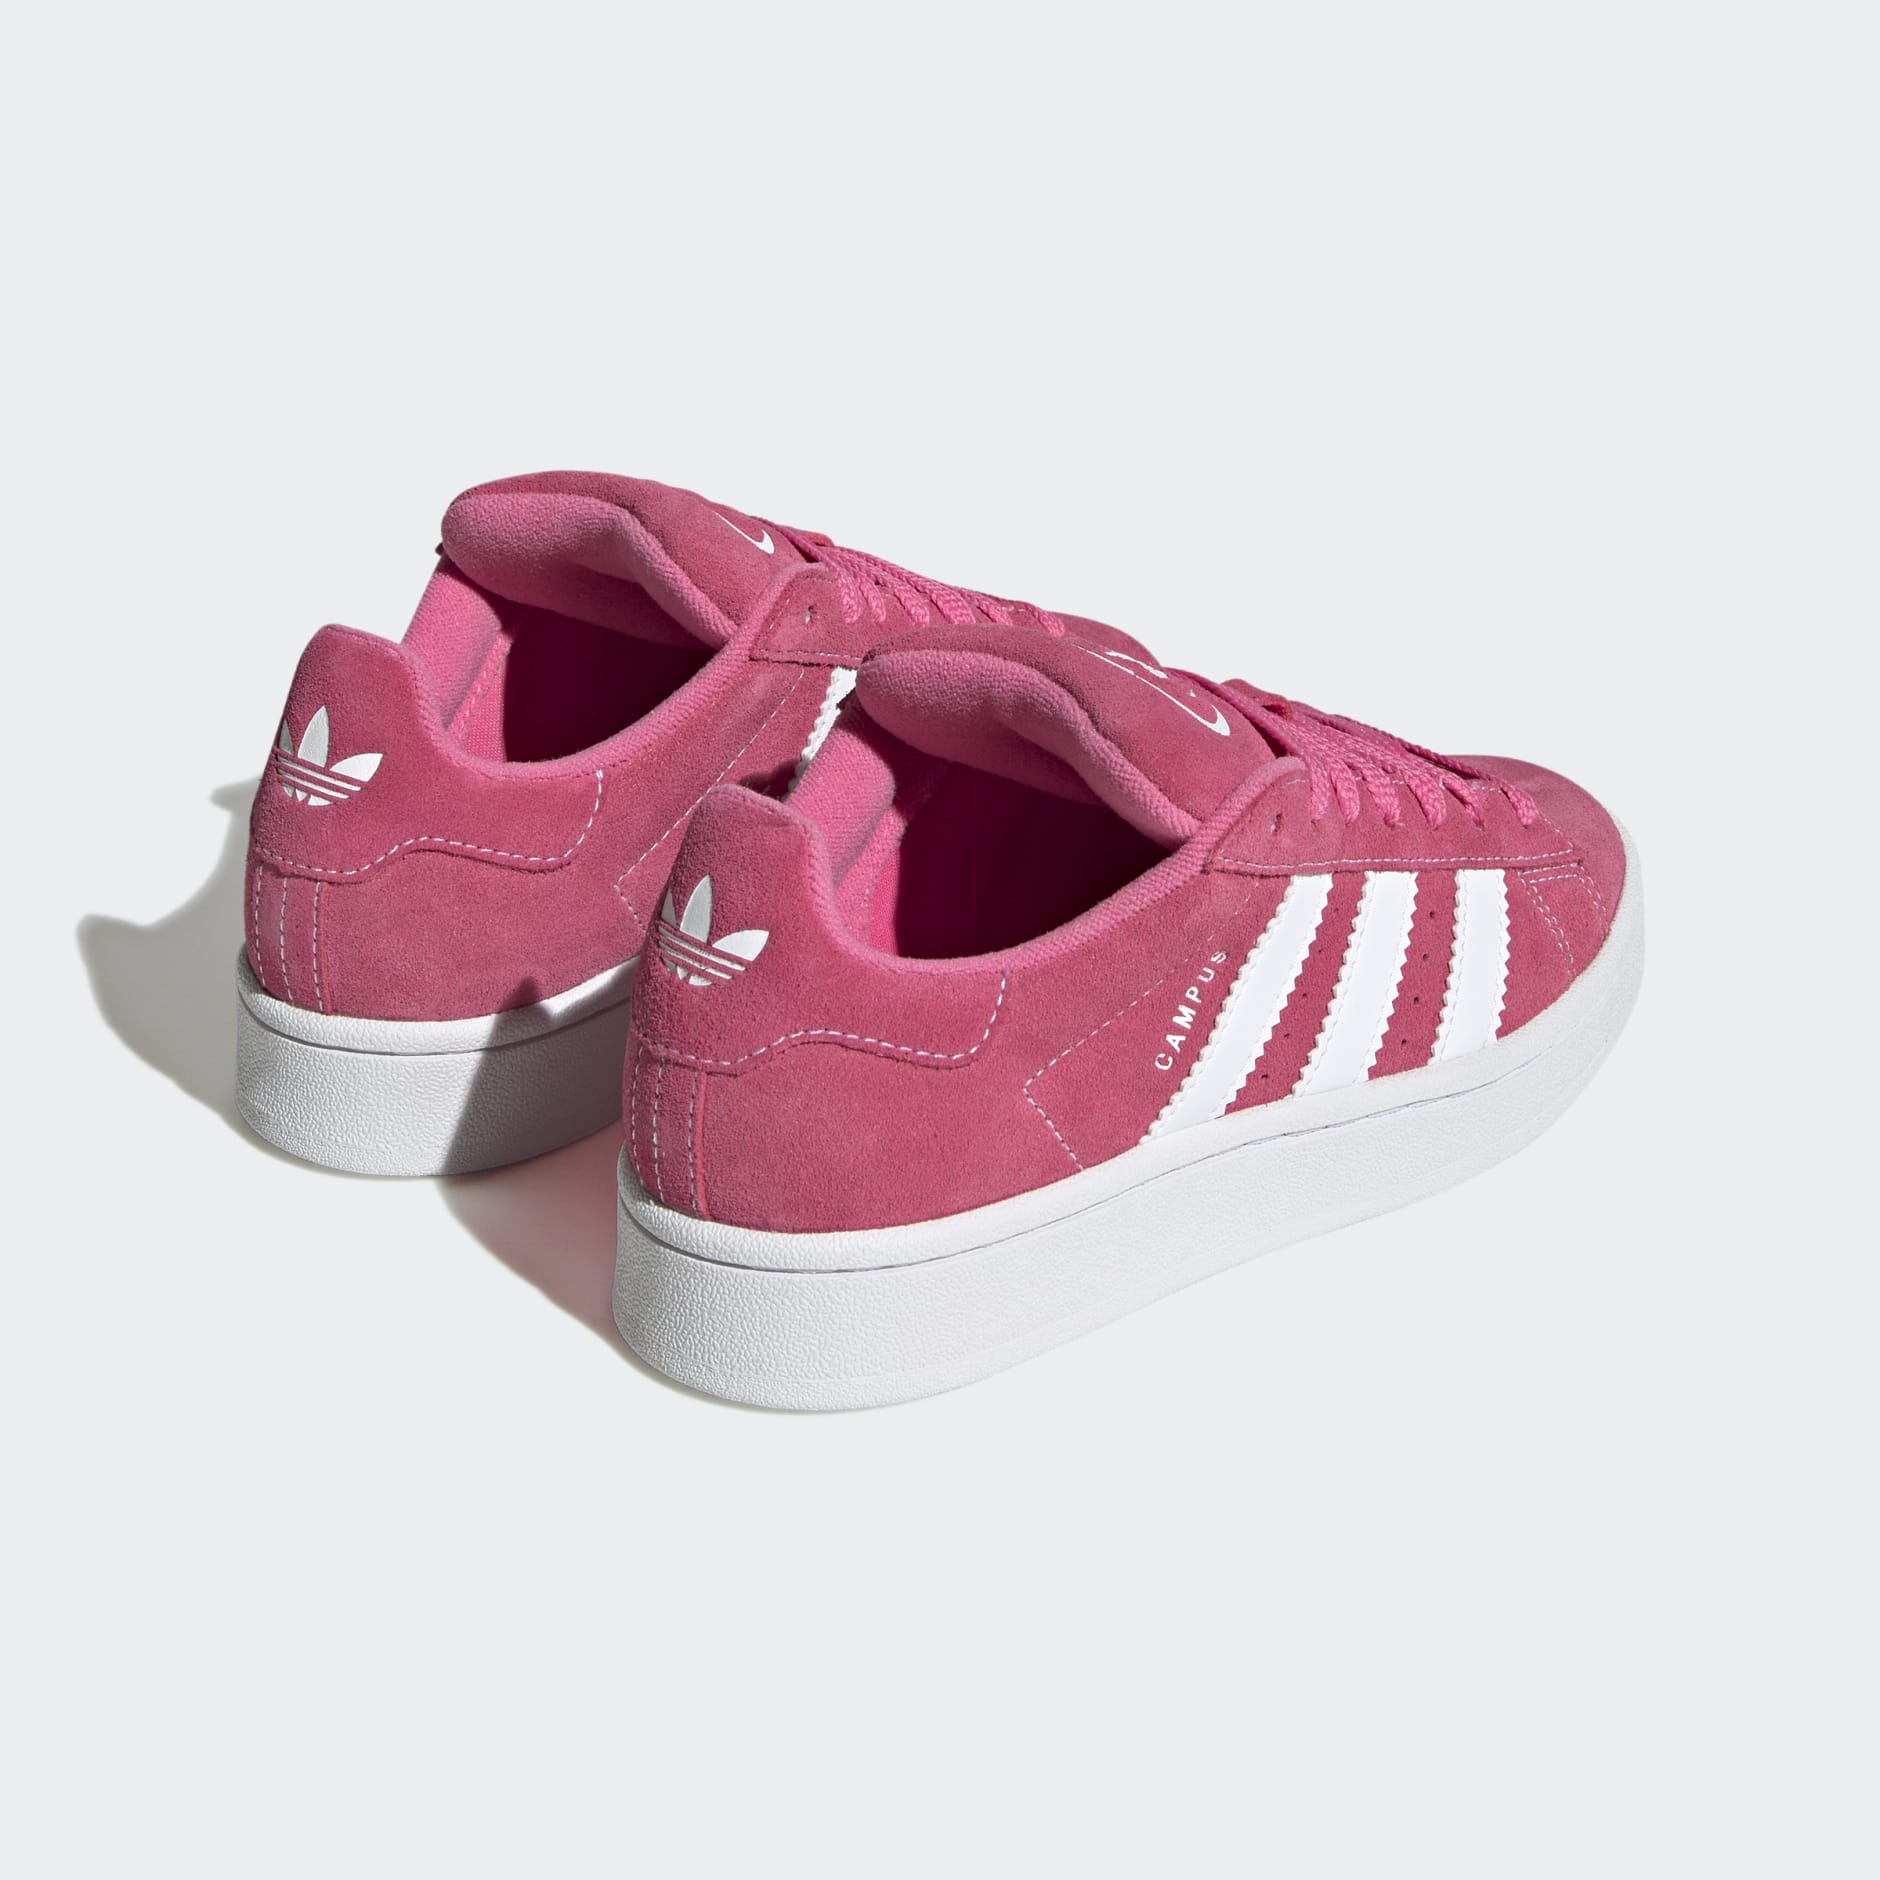 Kids Shoes - Campus 00s - adidas Shoes Oman | Pink